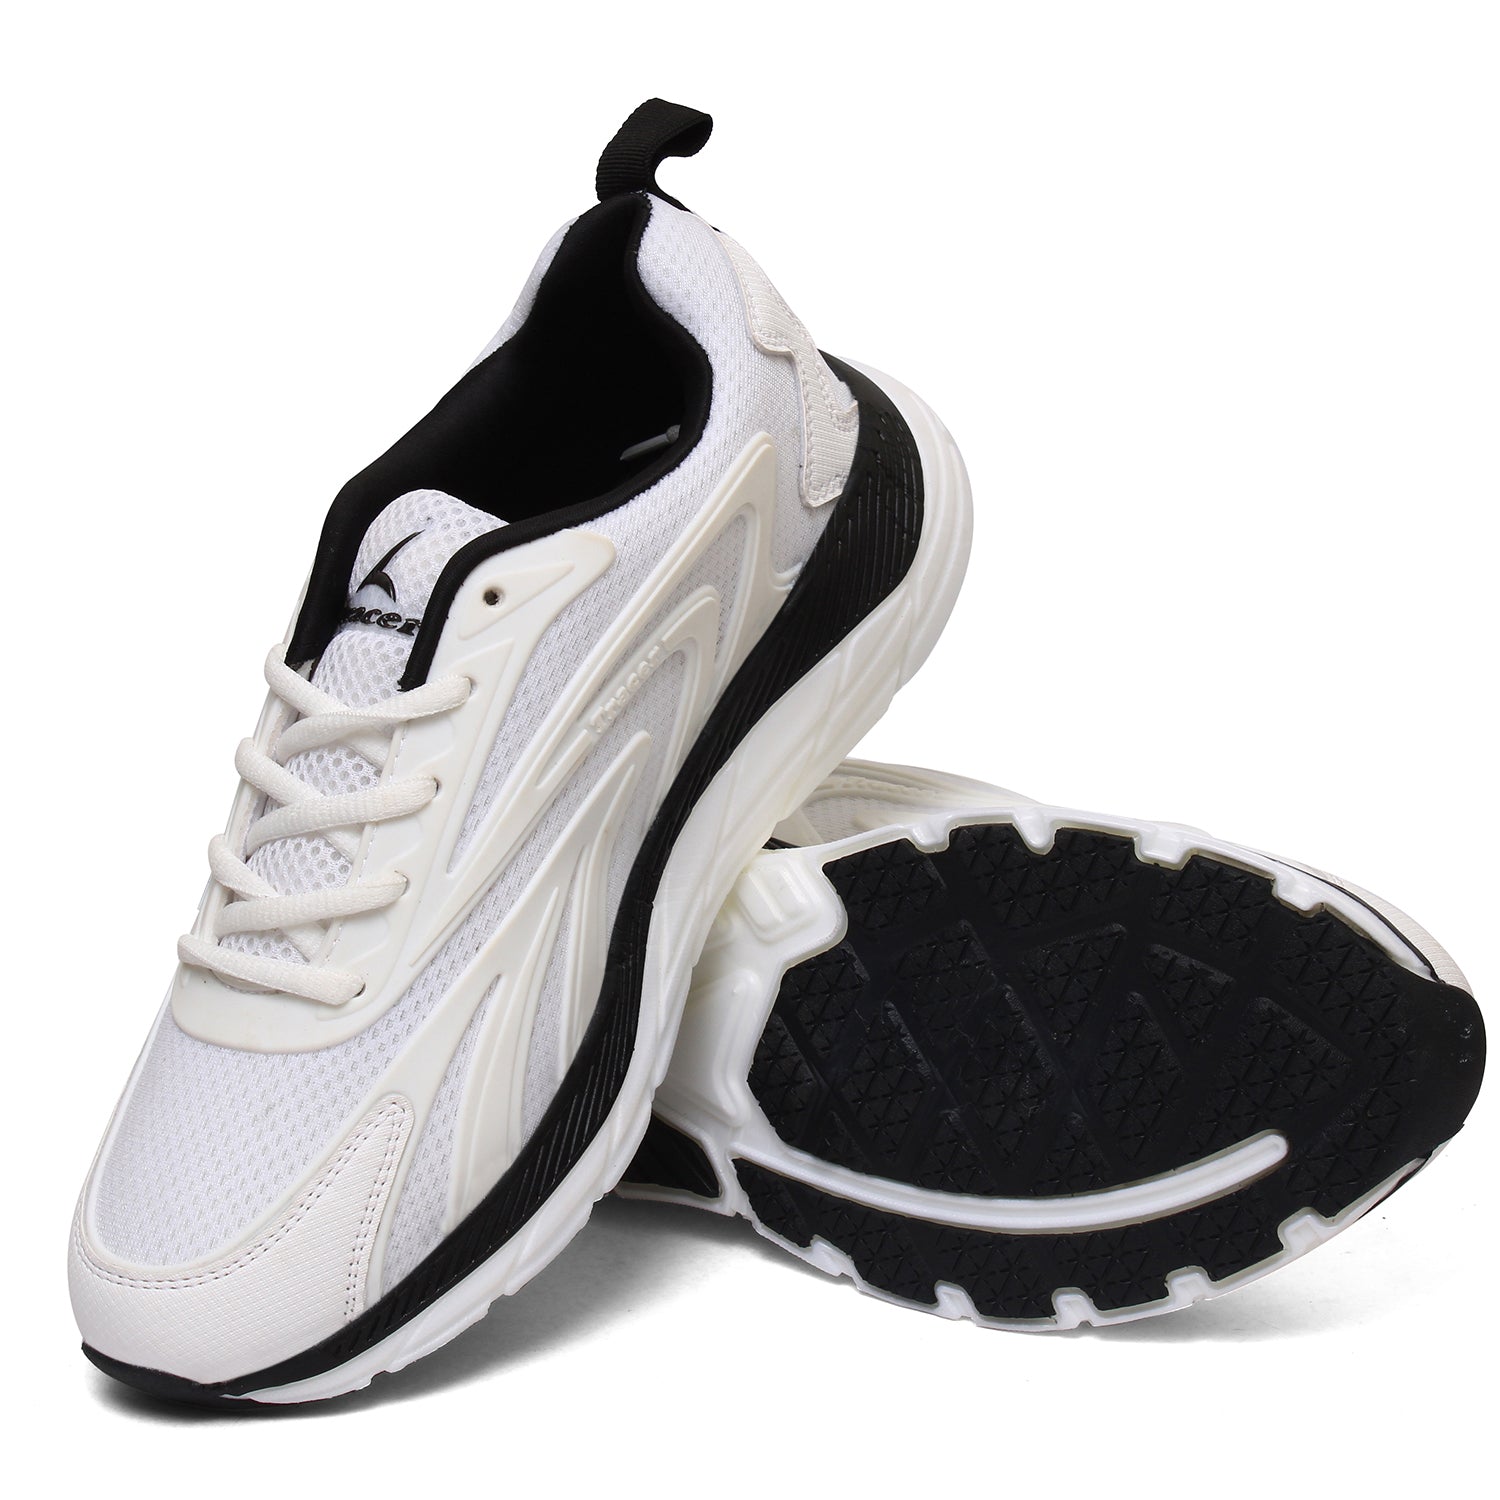 Tracer Ultimate 2272 white